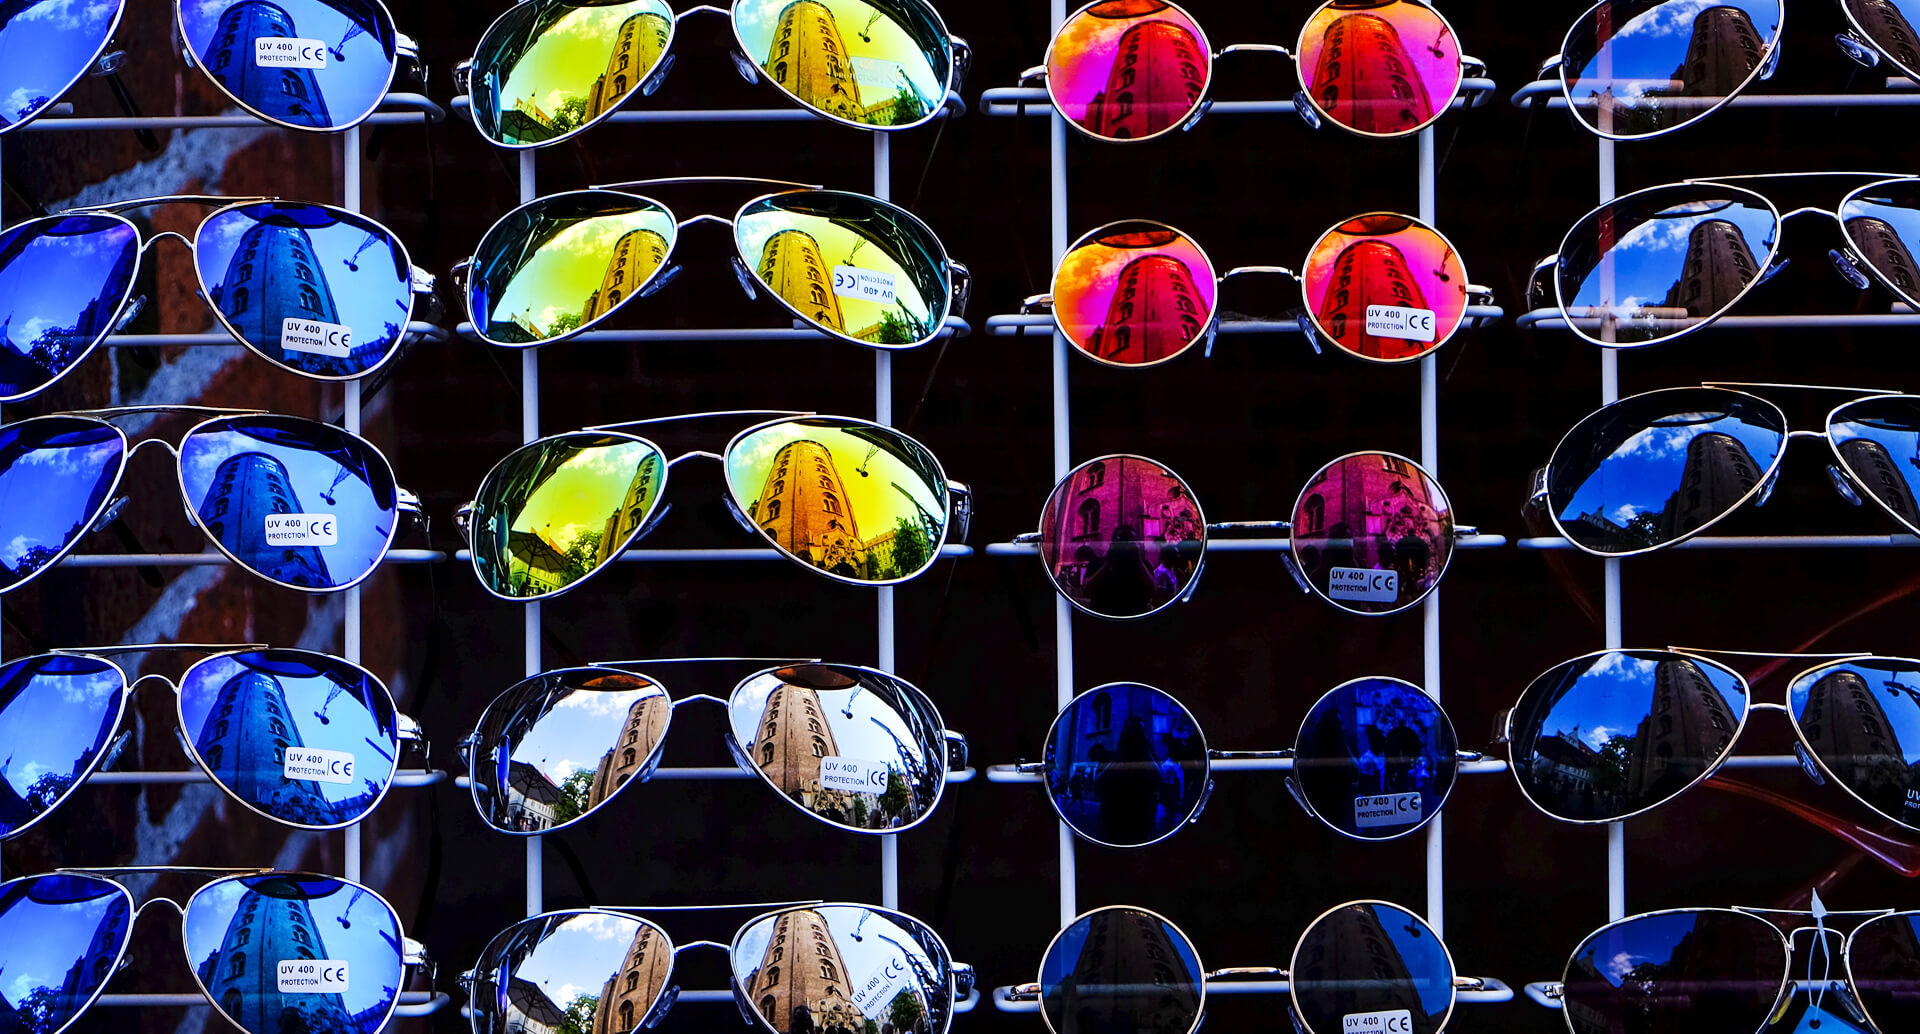 a display of sunglasses arranged by the colour of their lenses